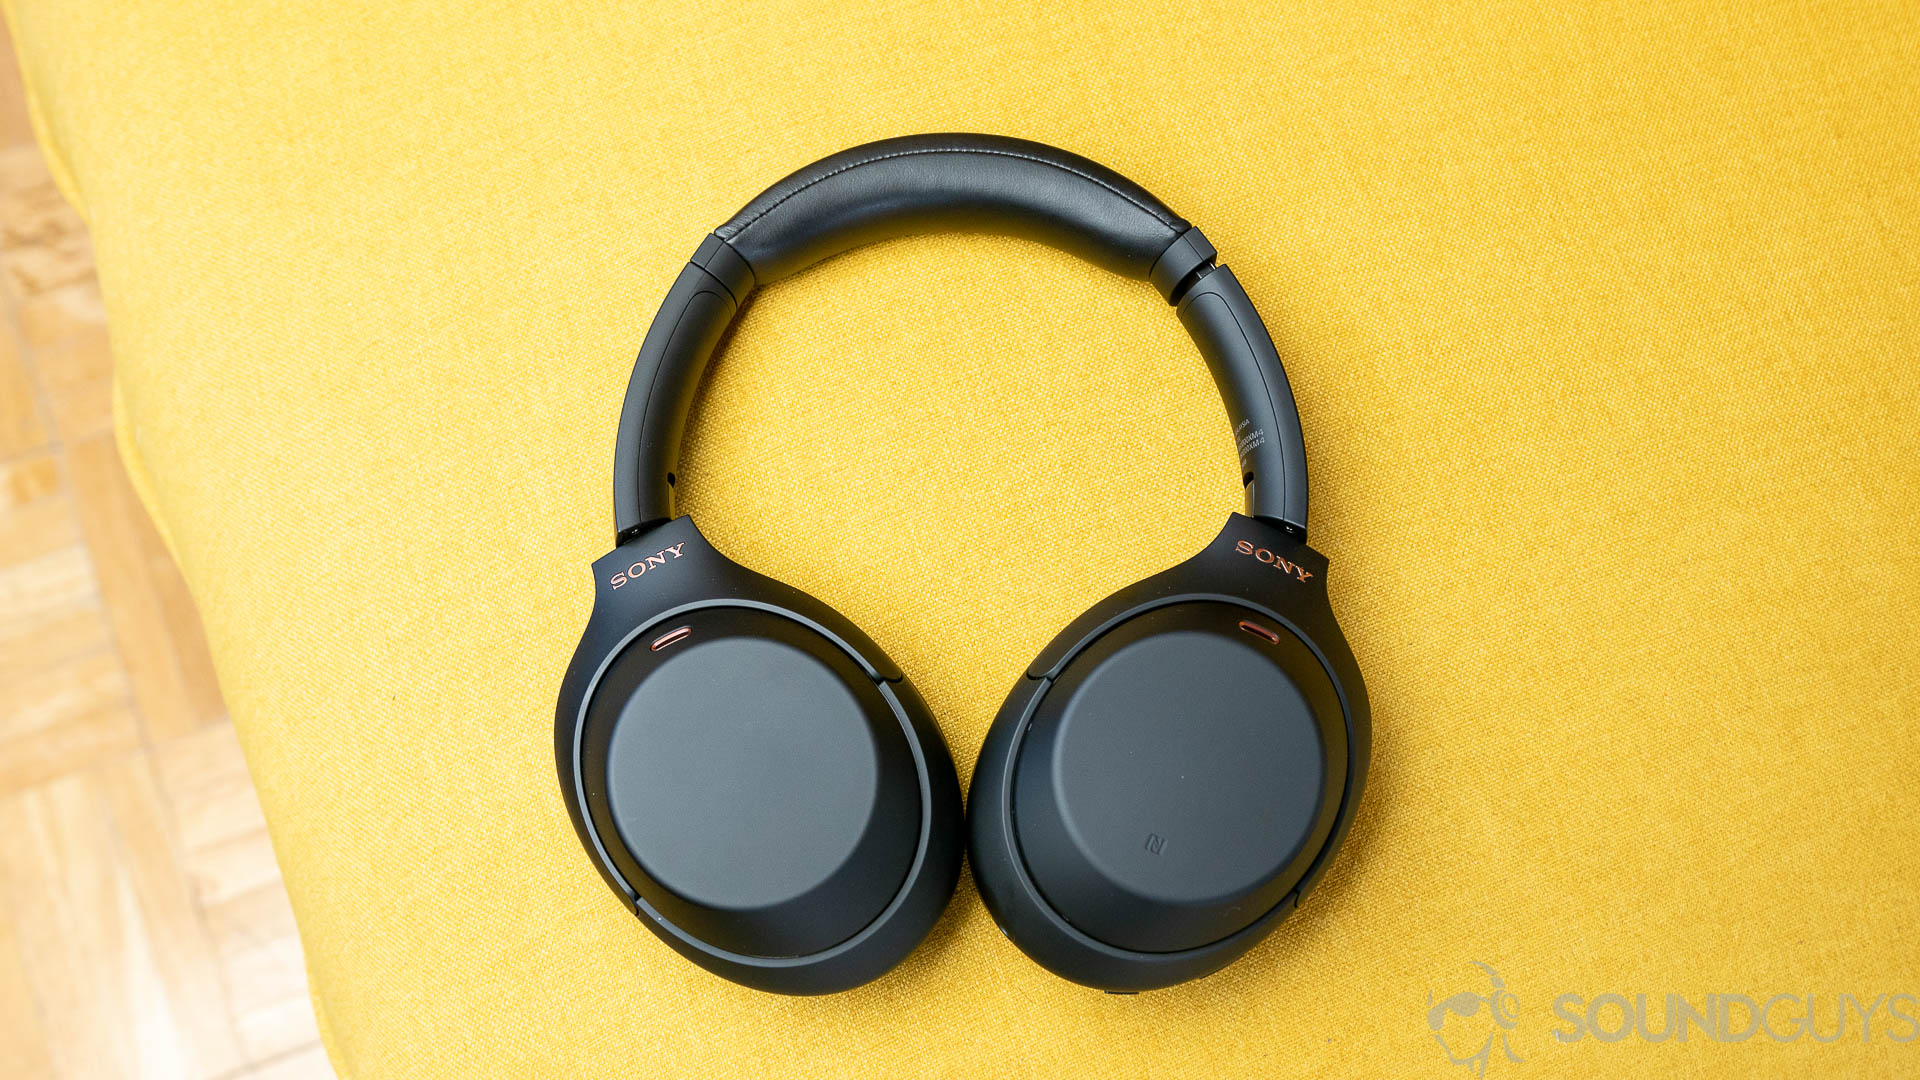 Sony WH-1000XM4 noise cancelling headphones full yellow backdrop.